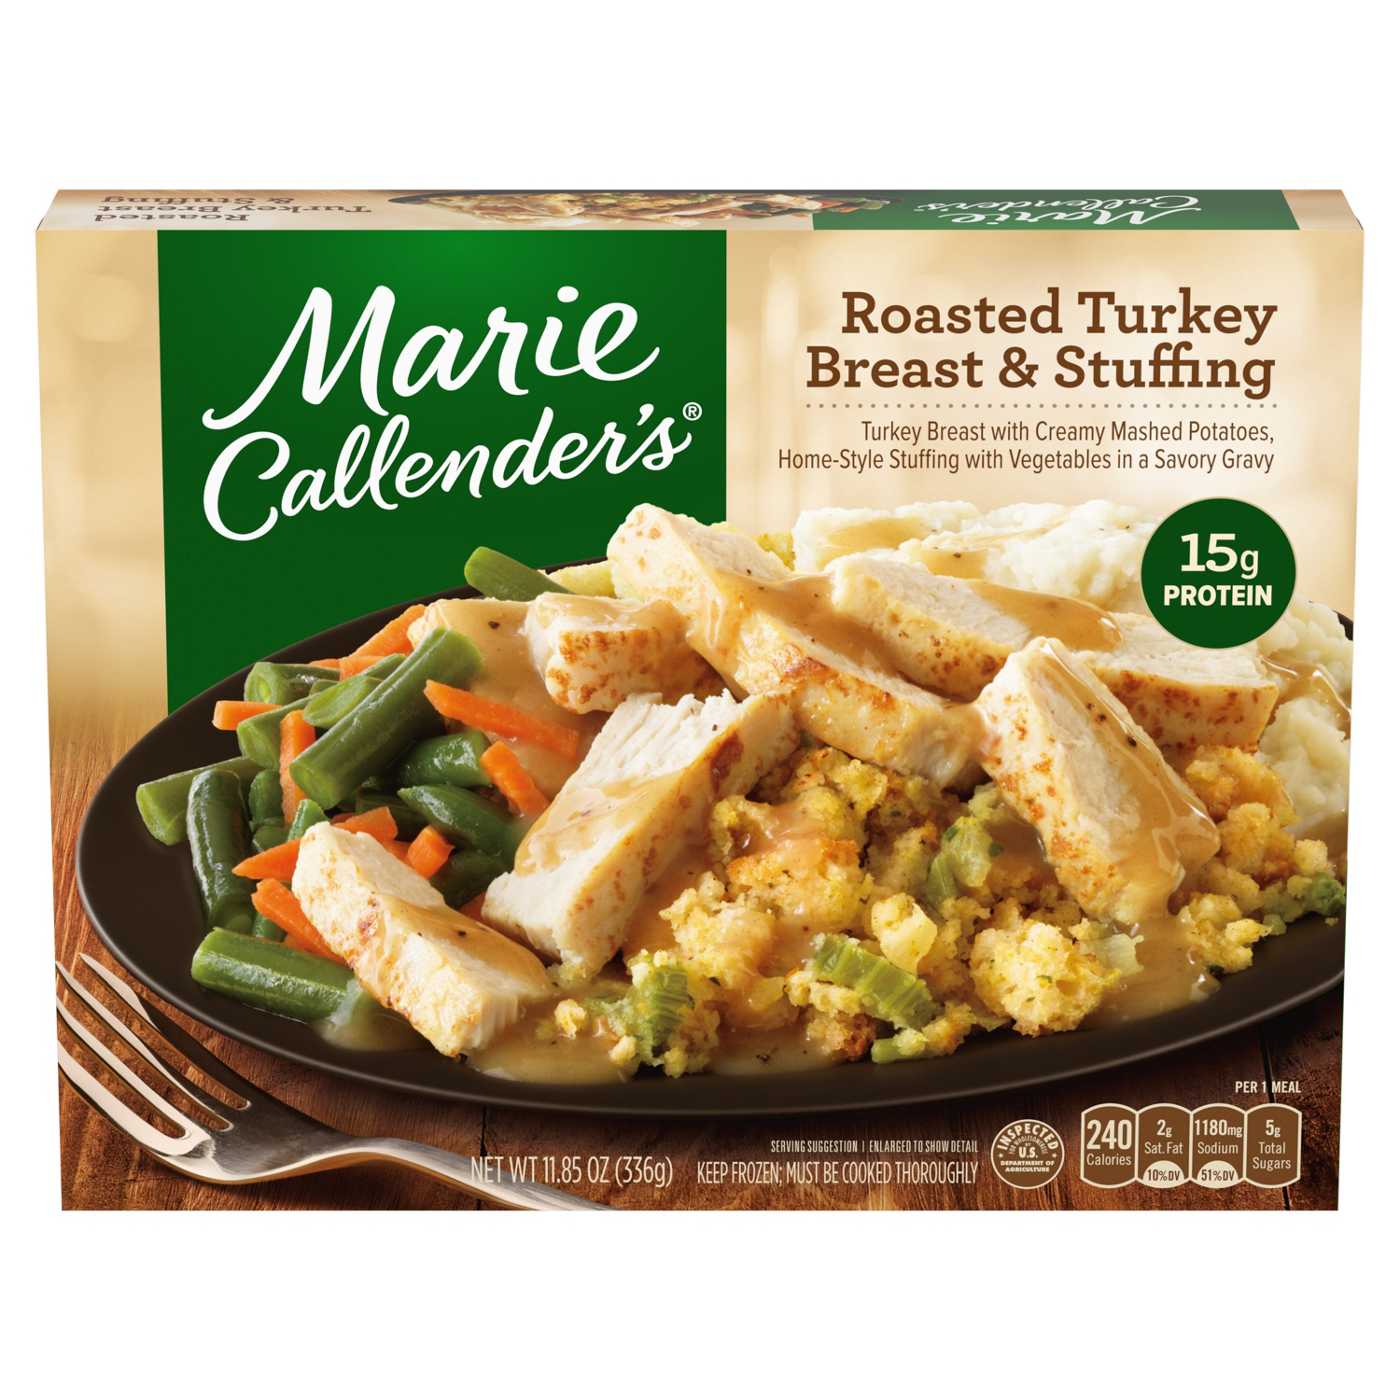 Marie Callender's Roasted Turkey Breast & Stuffing Frozen Meal; image 1 of 4